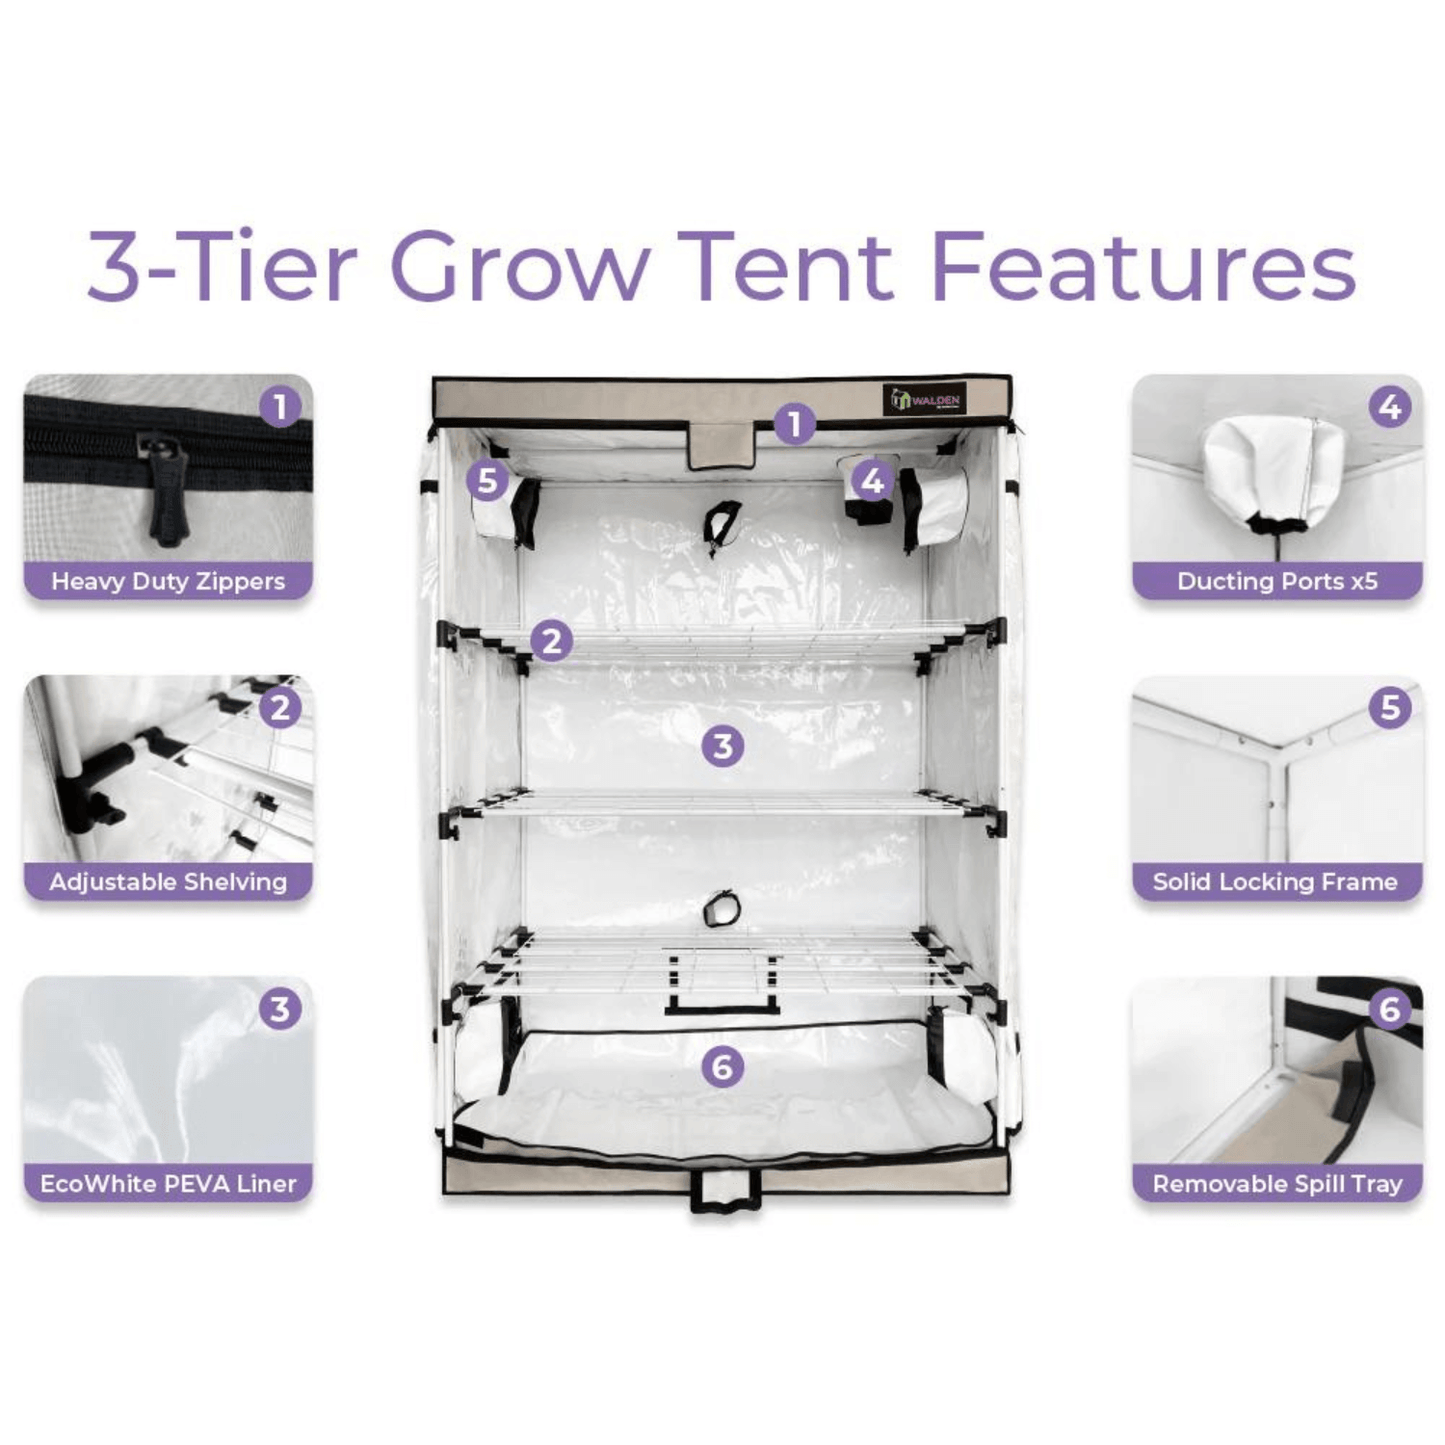 Active Grow Flowers & Fruits High Intensity 3-Tier LED Walden White Grow Tent Kit AG/24TENT/W/3S/FK Kits 769947348193